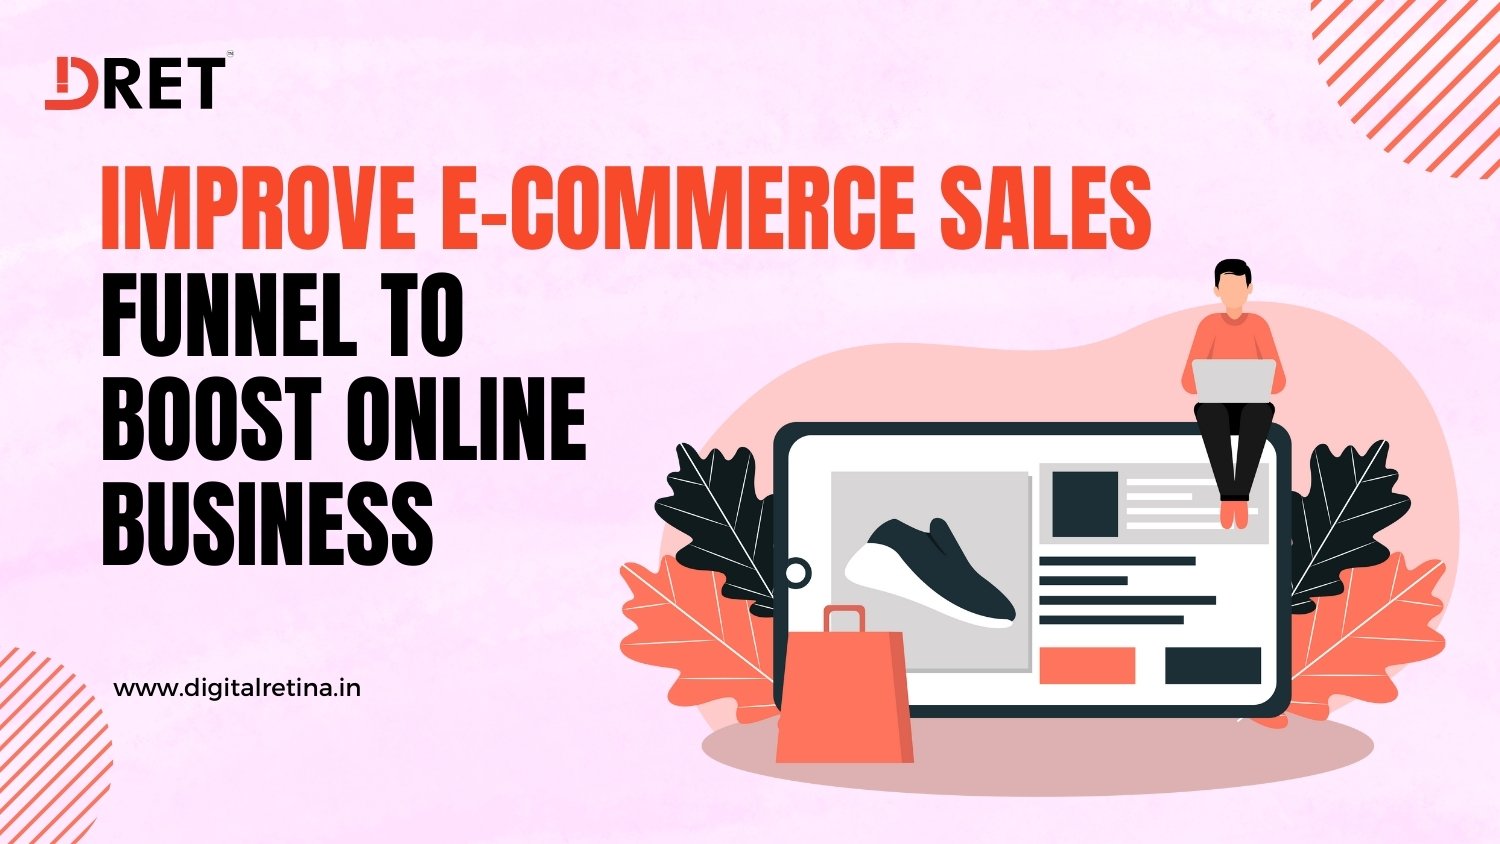 Improve E-commerce Sales Funnel to Boost Online Business